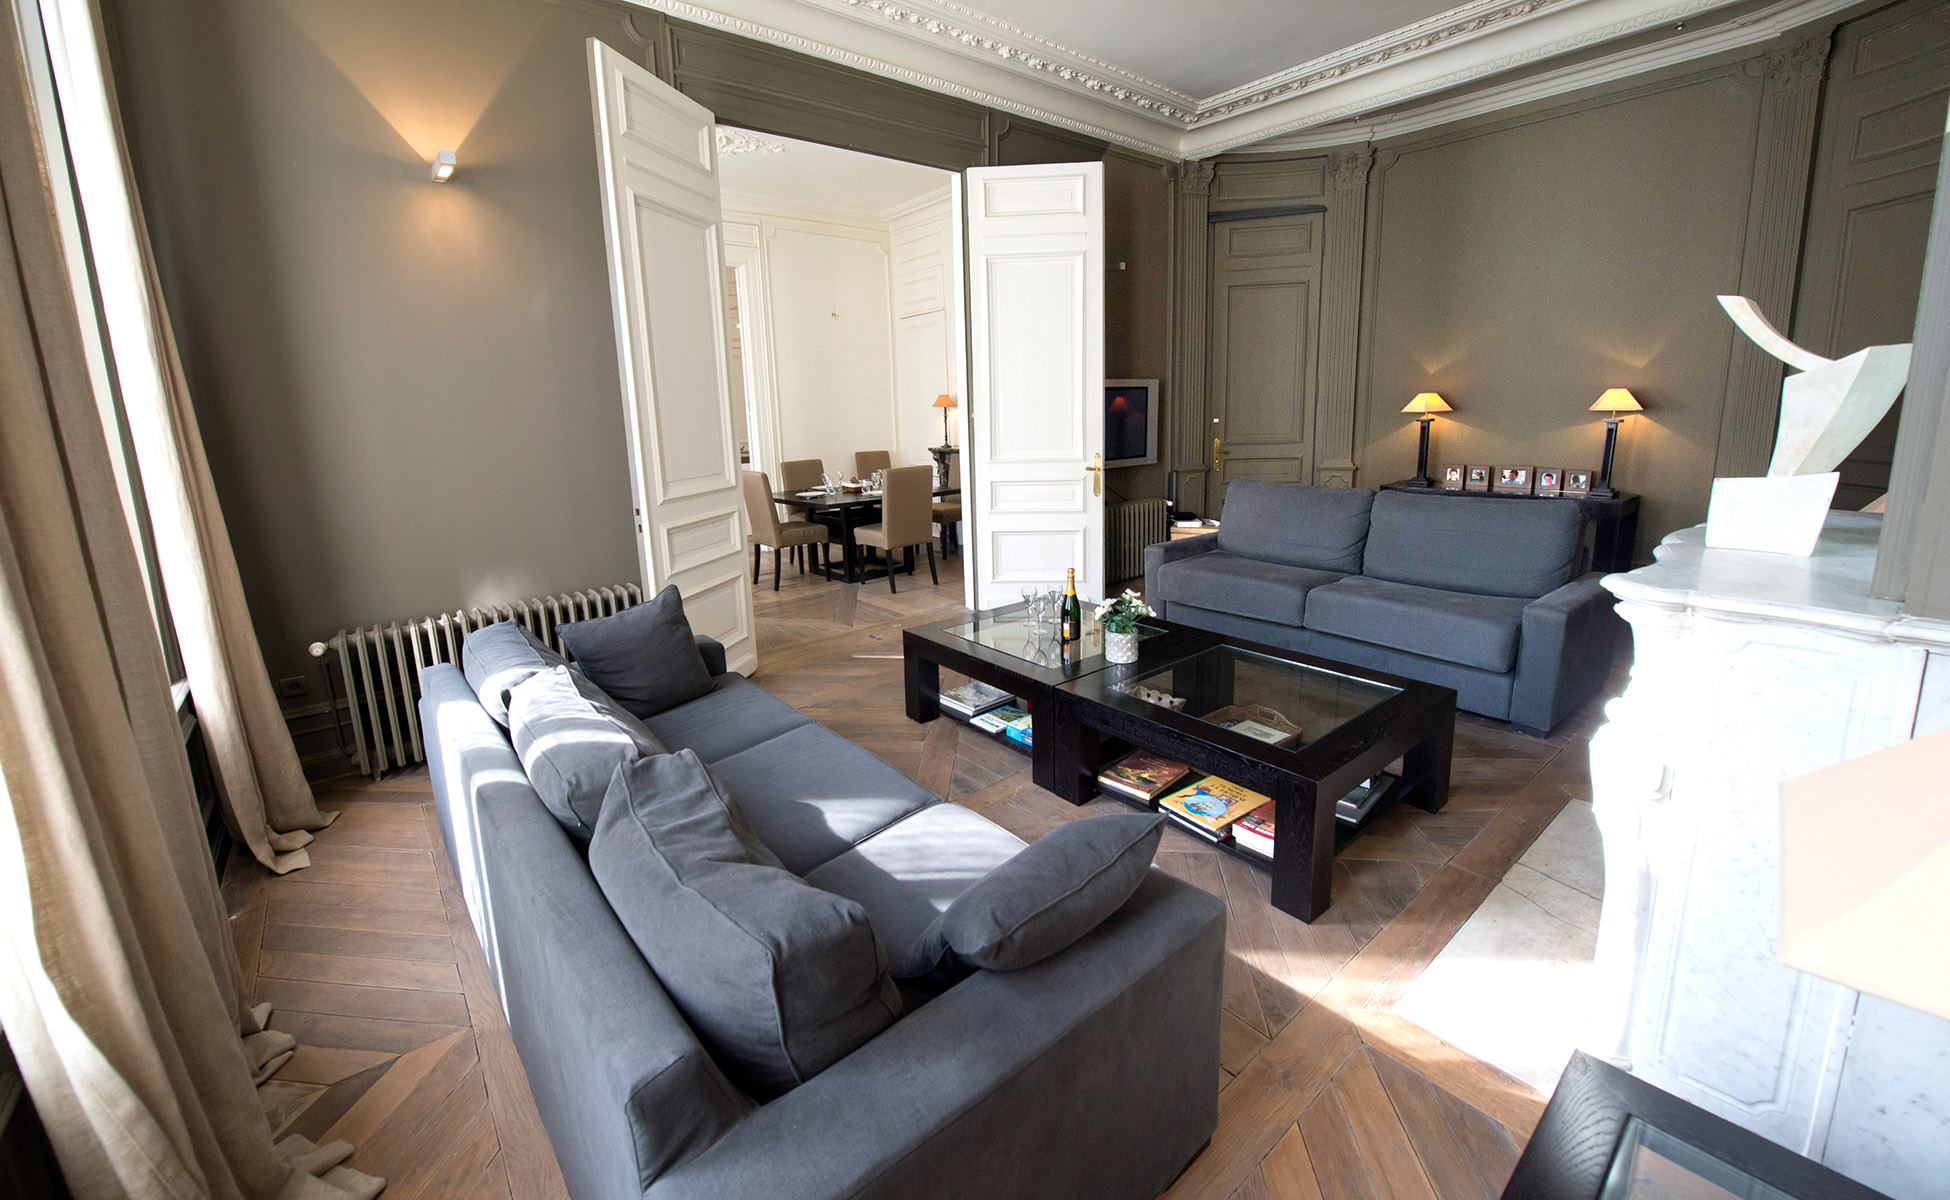 <p>Lovelydays Luxury Rentals introduce you pictures of a charming house in the heart of Lille</p>